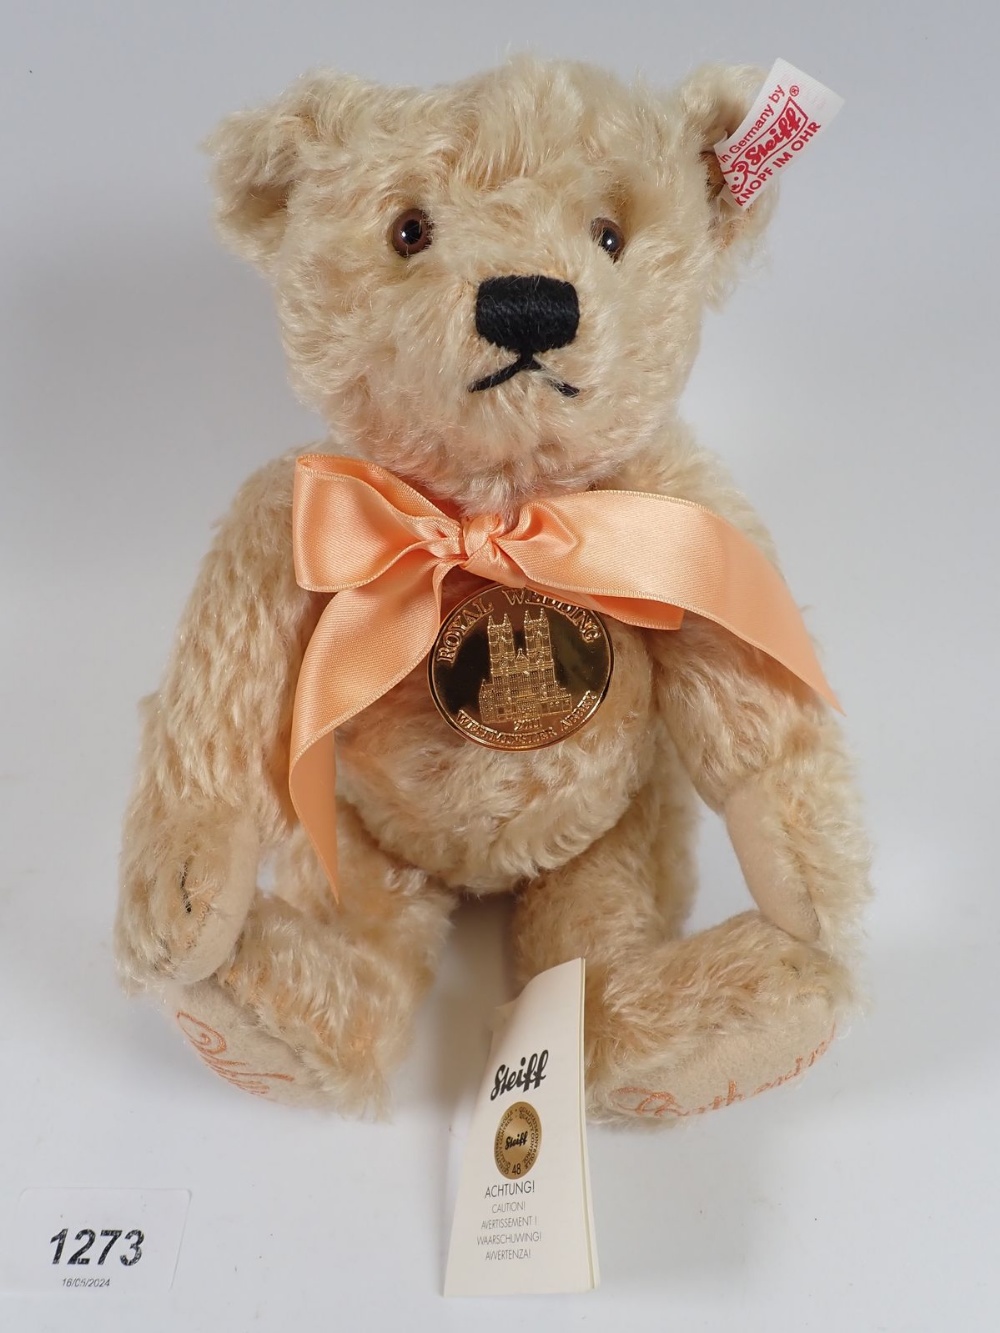 A Steiff Royal Wedding Bear 2011, limited edition with bag and certificate - Image 2 of 2